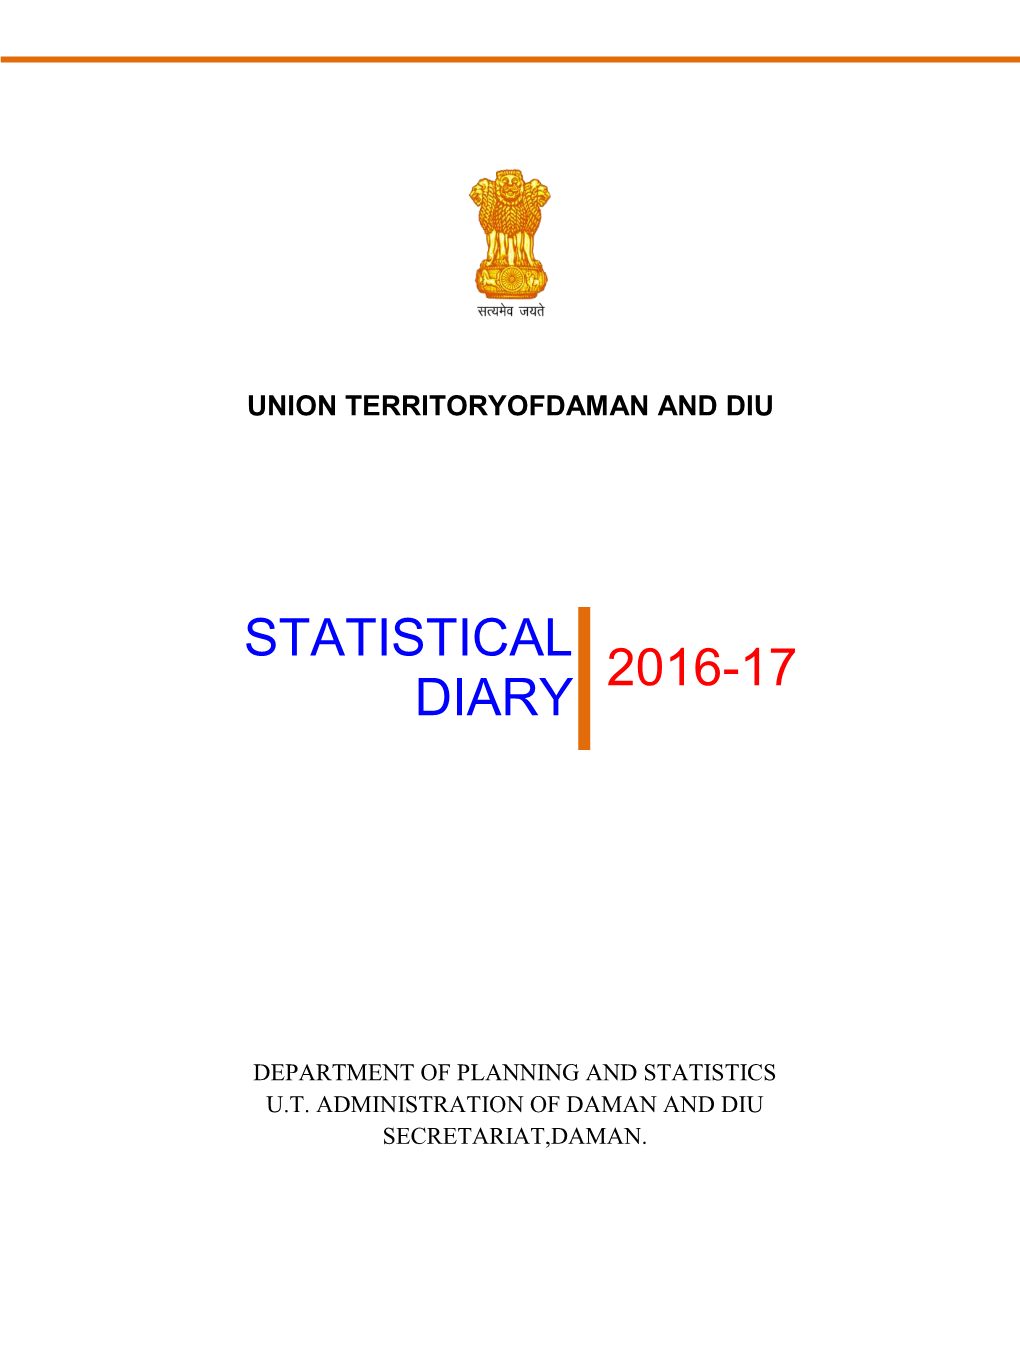 Statistical Diary 2016-17Of UT of Daman and Diu Is a Regular Publication of the Department of Planning and Statistics